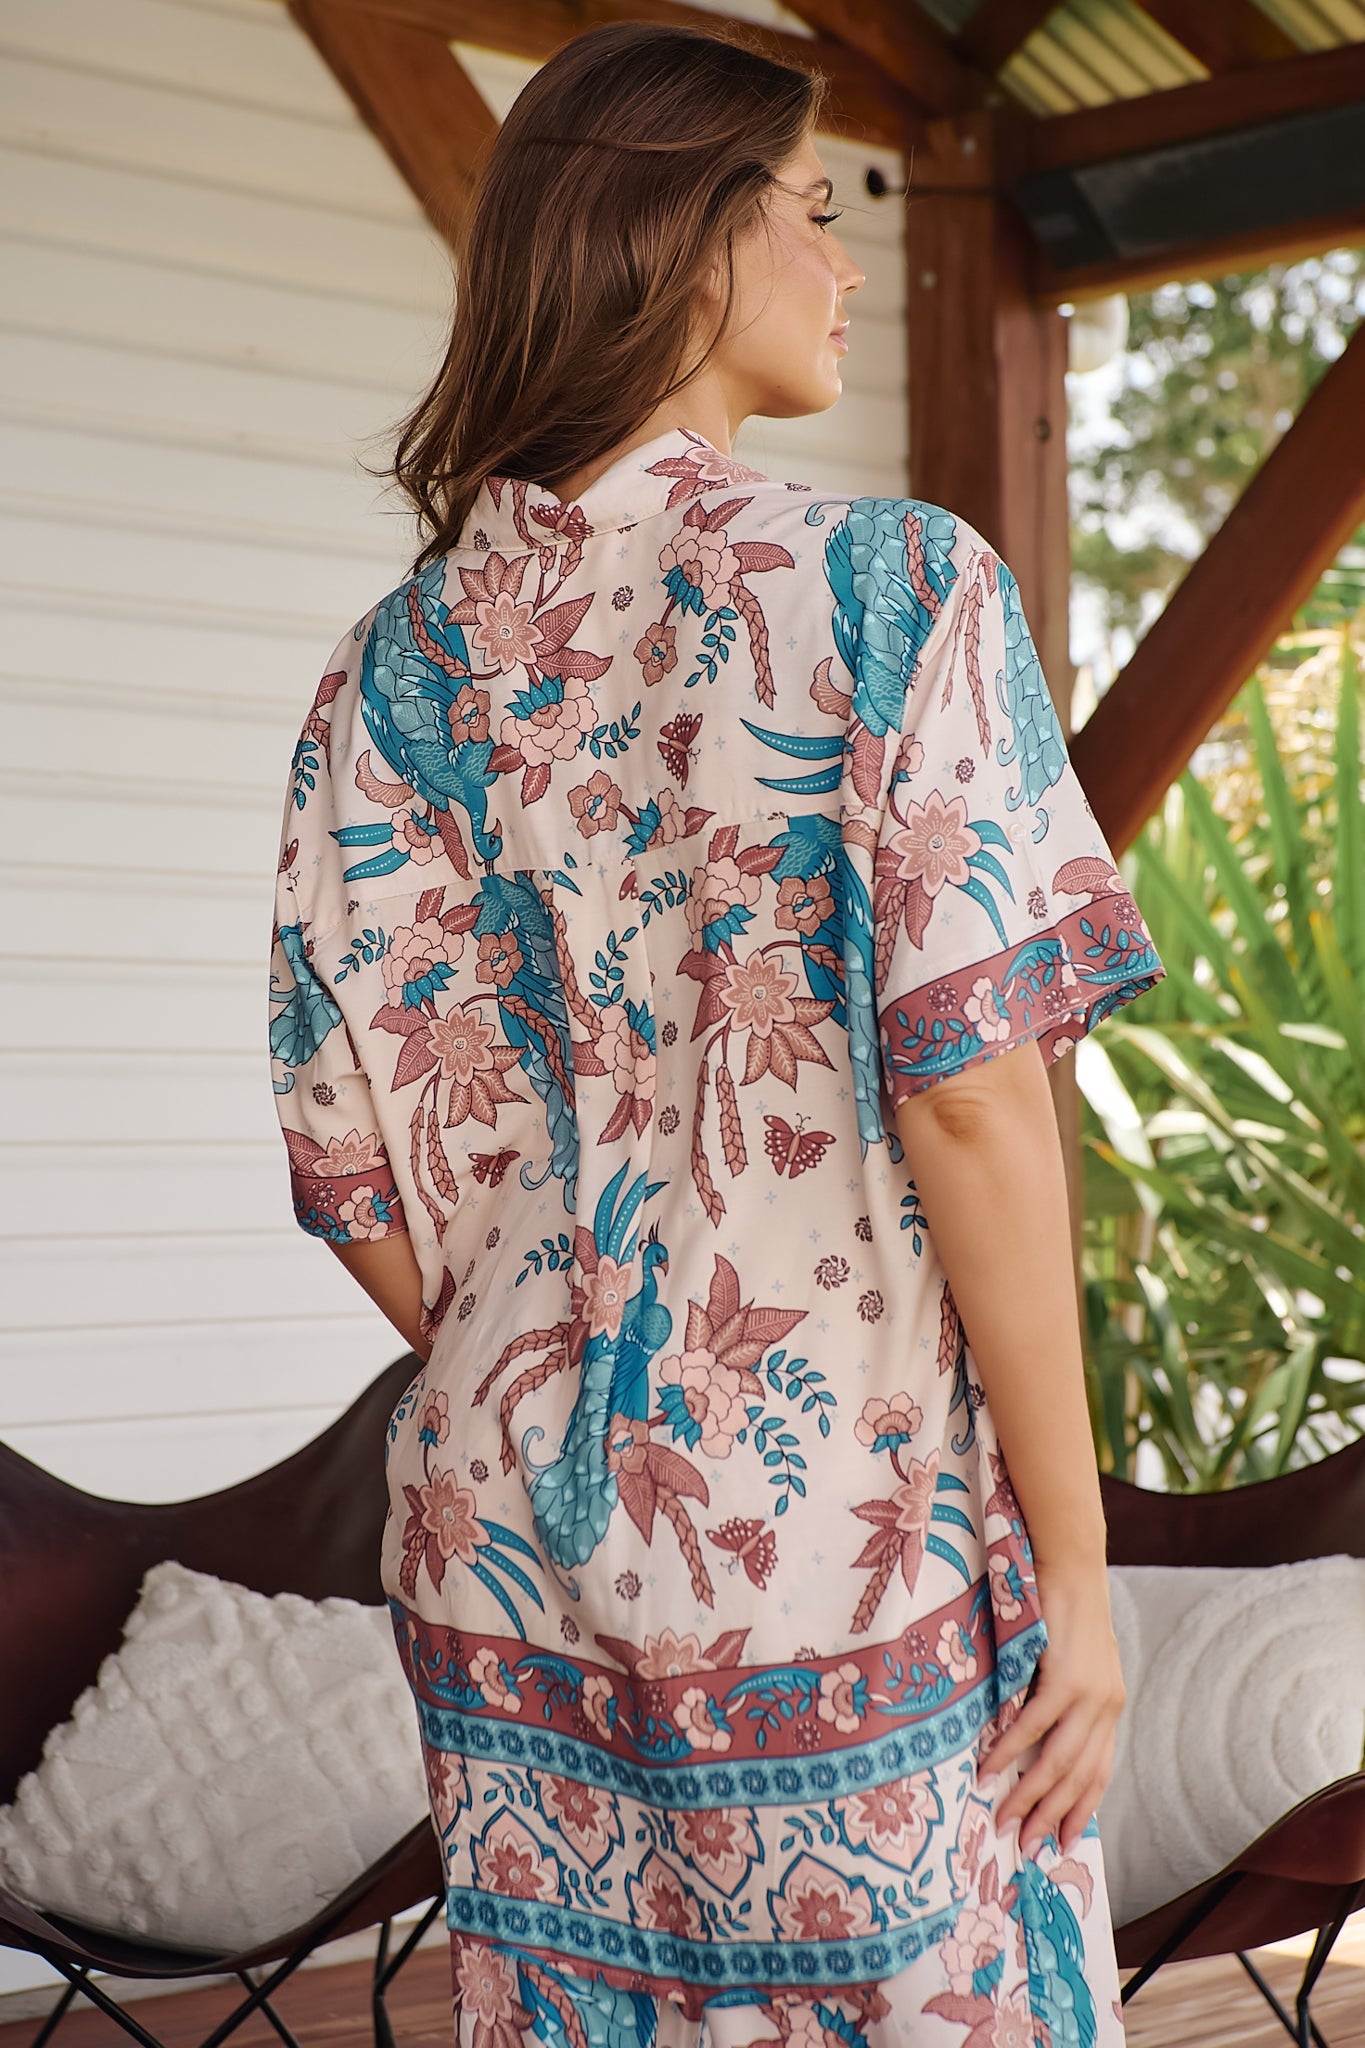 JAASE - Lola Shirt: High-Low Button Down Shirt in Symphony Print